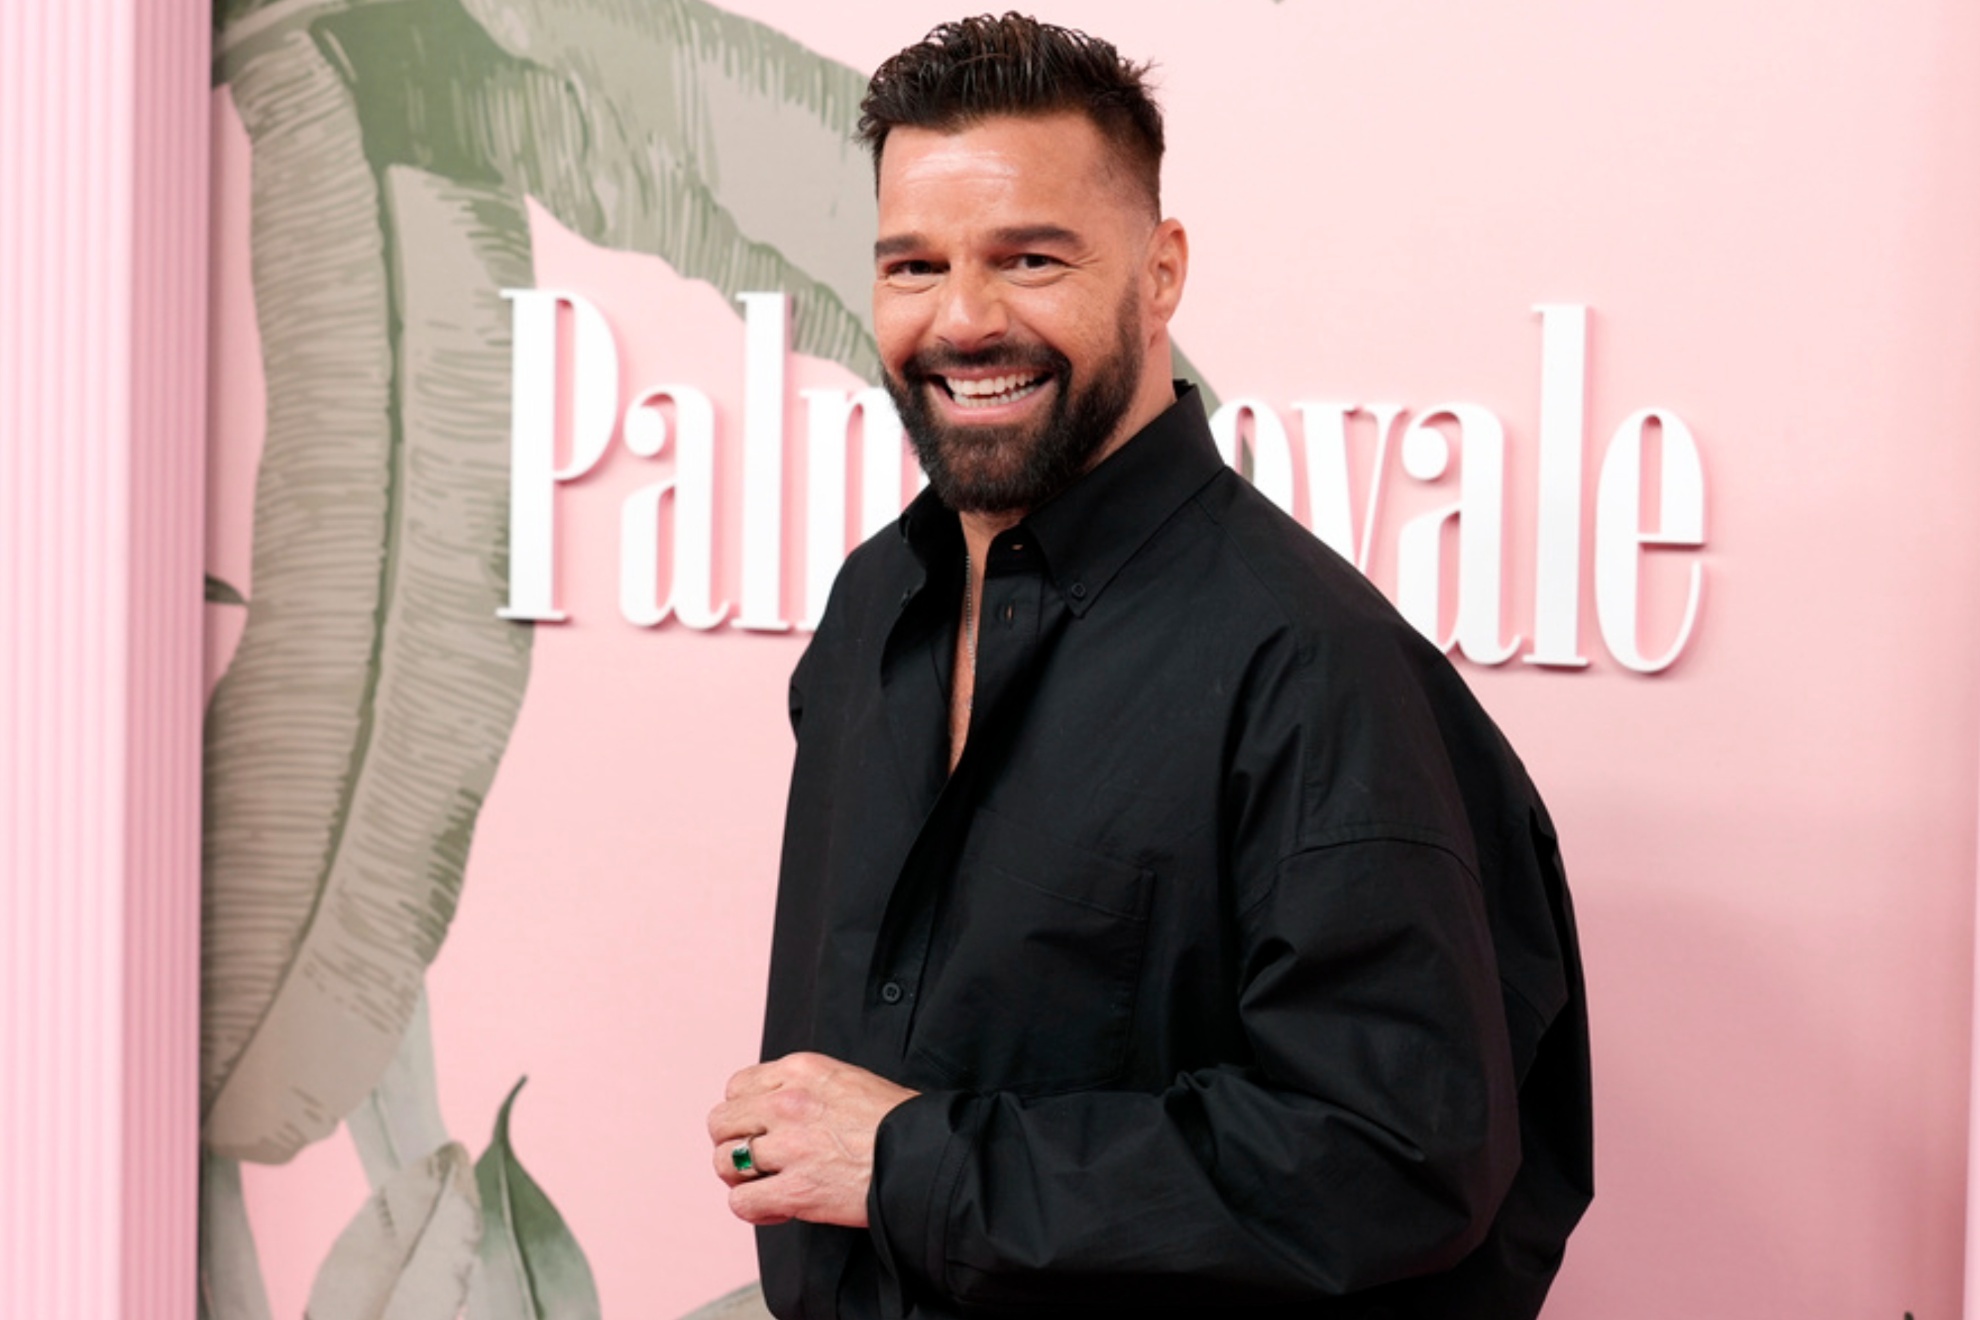 Ricky Martin is among the welthiest Latin music artist